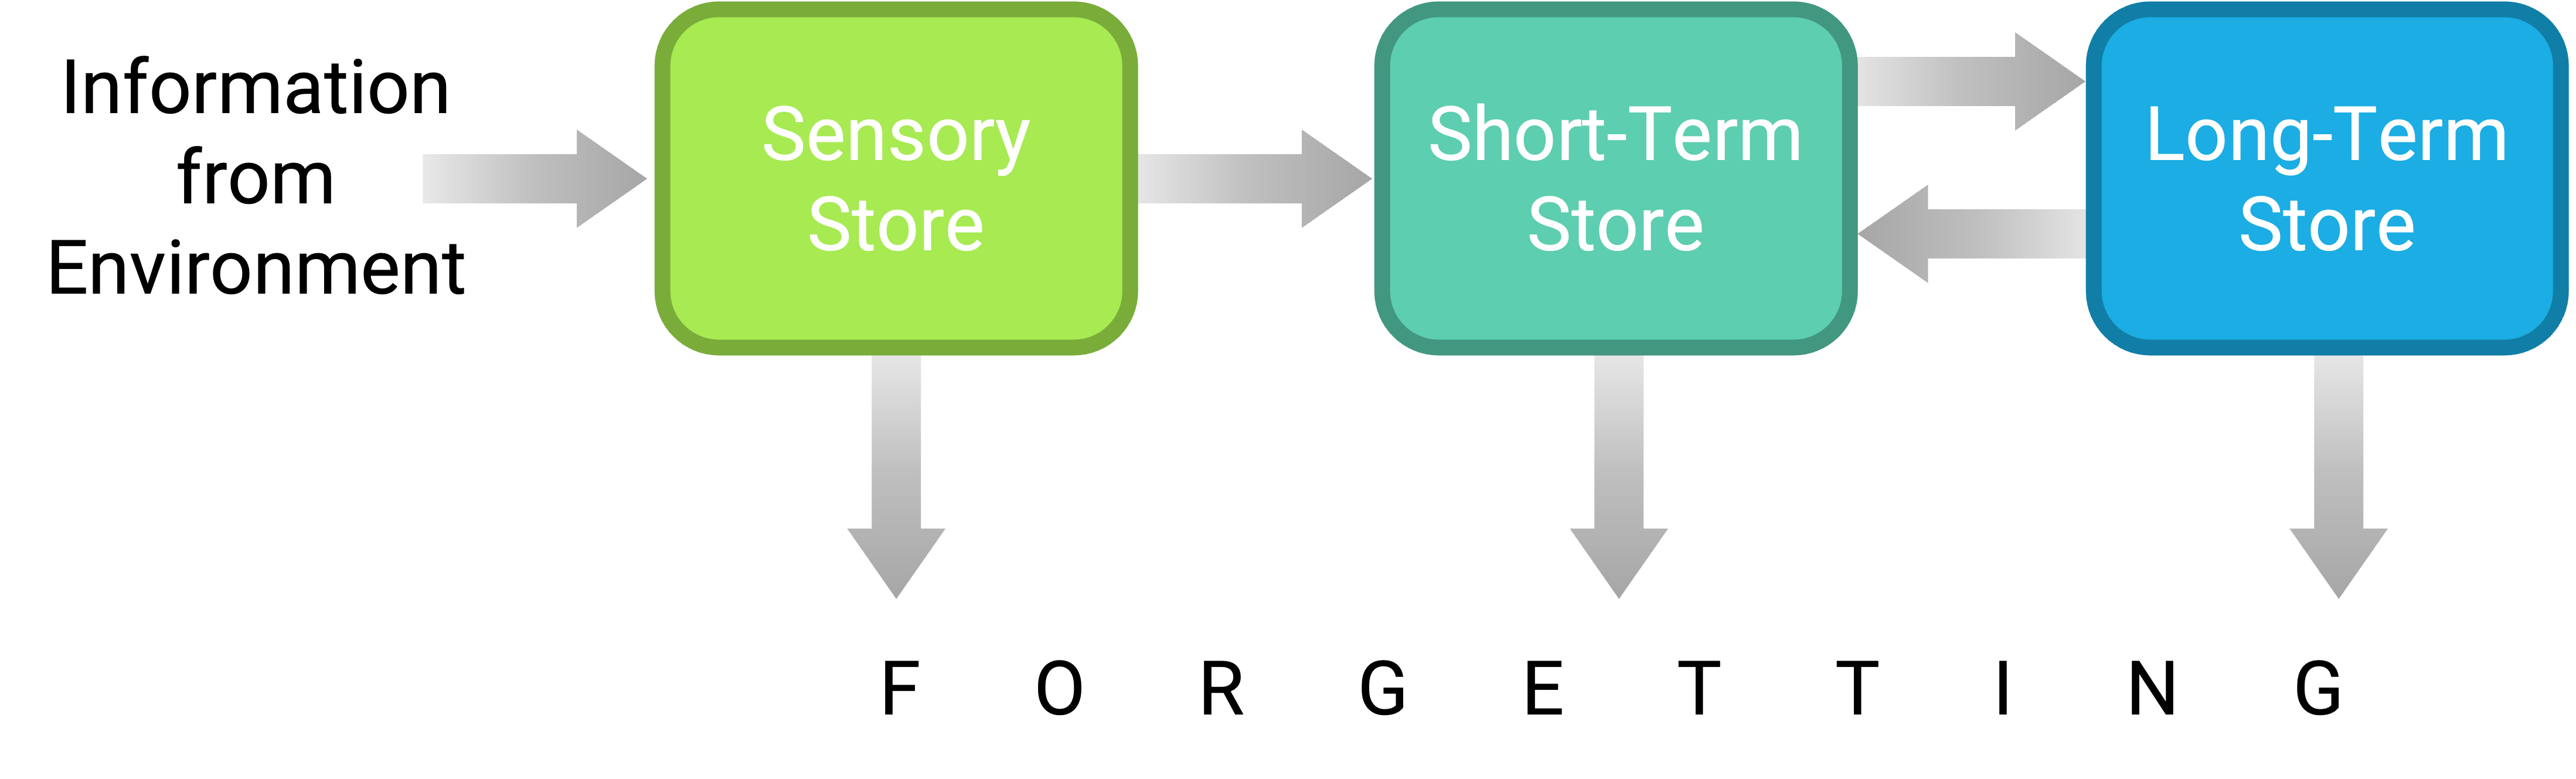 Representation of the multistore model of human memory. In the multistore model of human memory, information from the environment passes through a sensory store on its way to a short-term store, where it can be rehearsed, and then to a long-term store, where it can be stored and retrieved much later. This theory has been extremely successful at organizing old phenomena and predicting new ones.